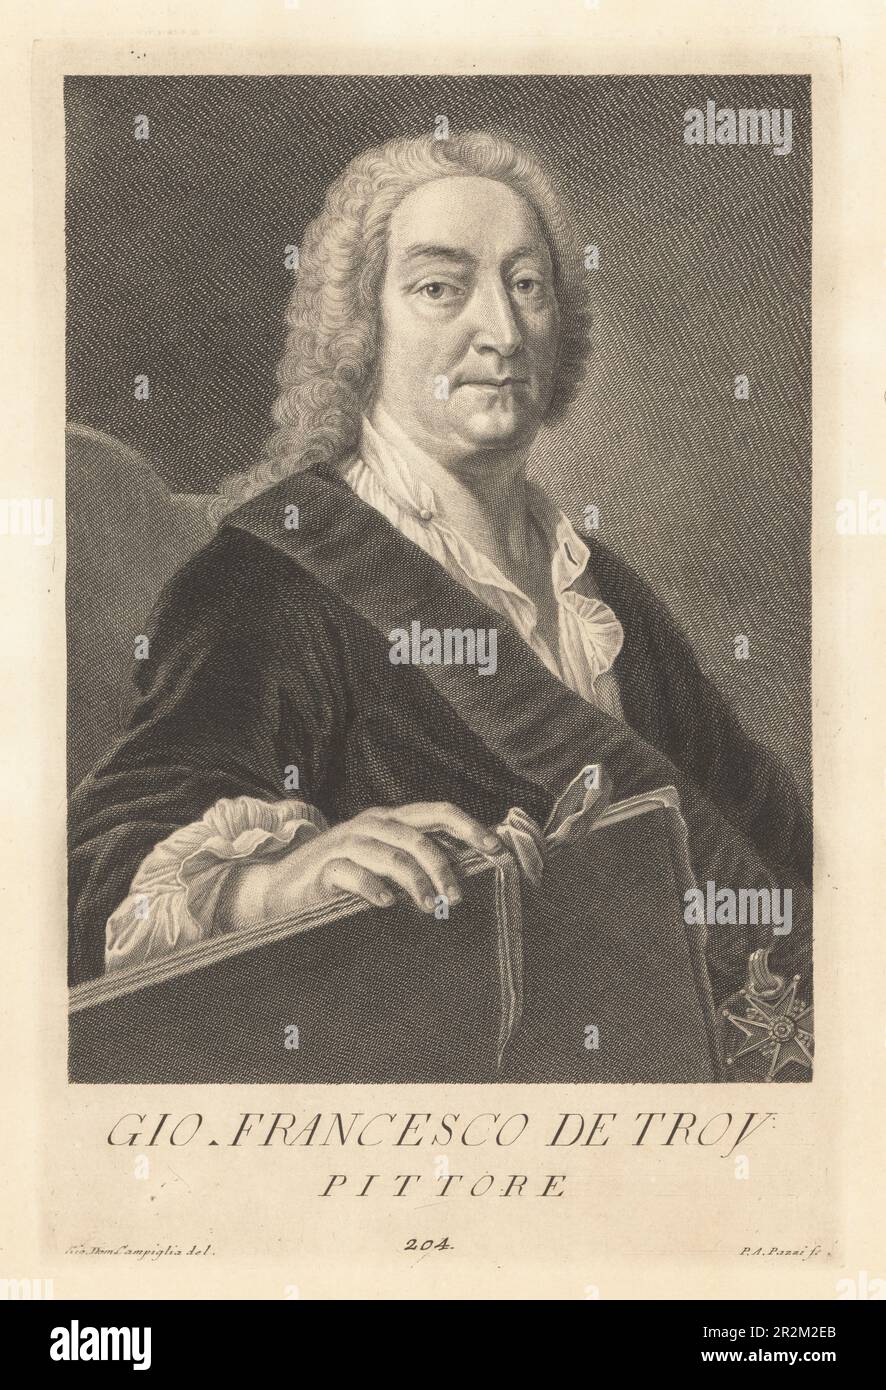 Jean-François de Troy, French Rococo easel and fresco painter, draughtsman and tapestry designer, 1679-1752. Director of the French Academy in Rome. In powdered wig with sash of the Order of St. Louis, holding a portfolio of drawings. Gio. Francesco de Troy, Pittore. Copperplate engraving by Pietro Antonio Pazzi after Giovanni Domenico Campiglia after a self portrait by the artist from Francesco Moucke's Museo Florentino (Museum Florentinum), Serie di Ritratti de Pittori (Series of Portraits of Painters) stamperia Mouckiana, Florence, 1752-62. Stock Photo